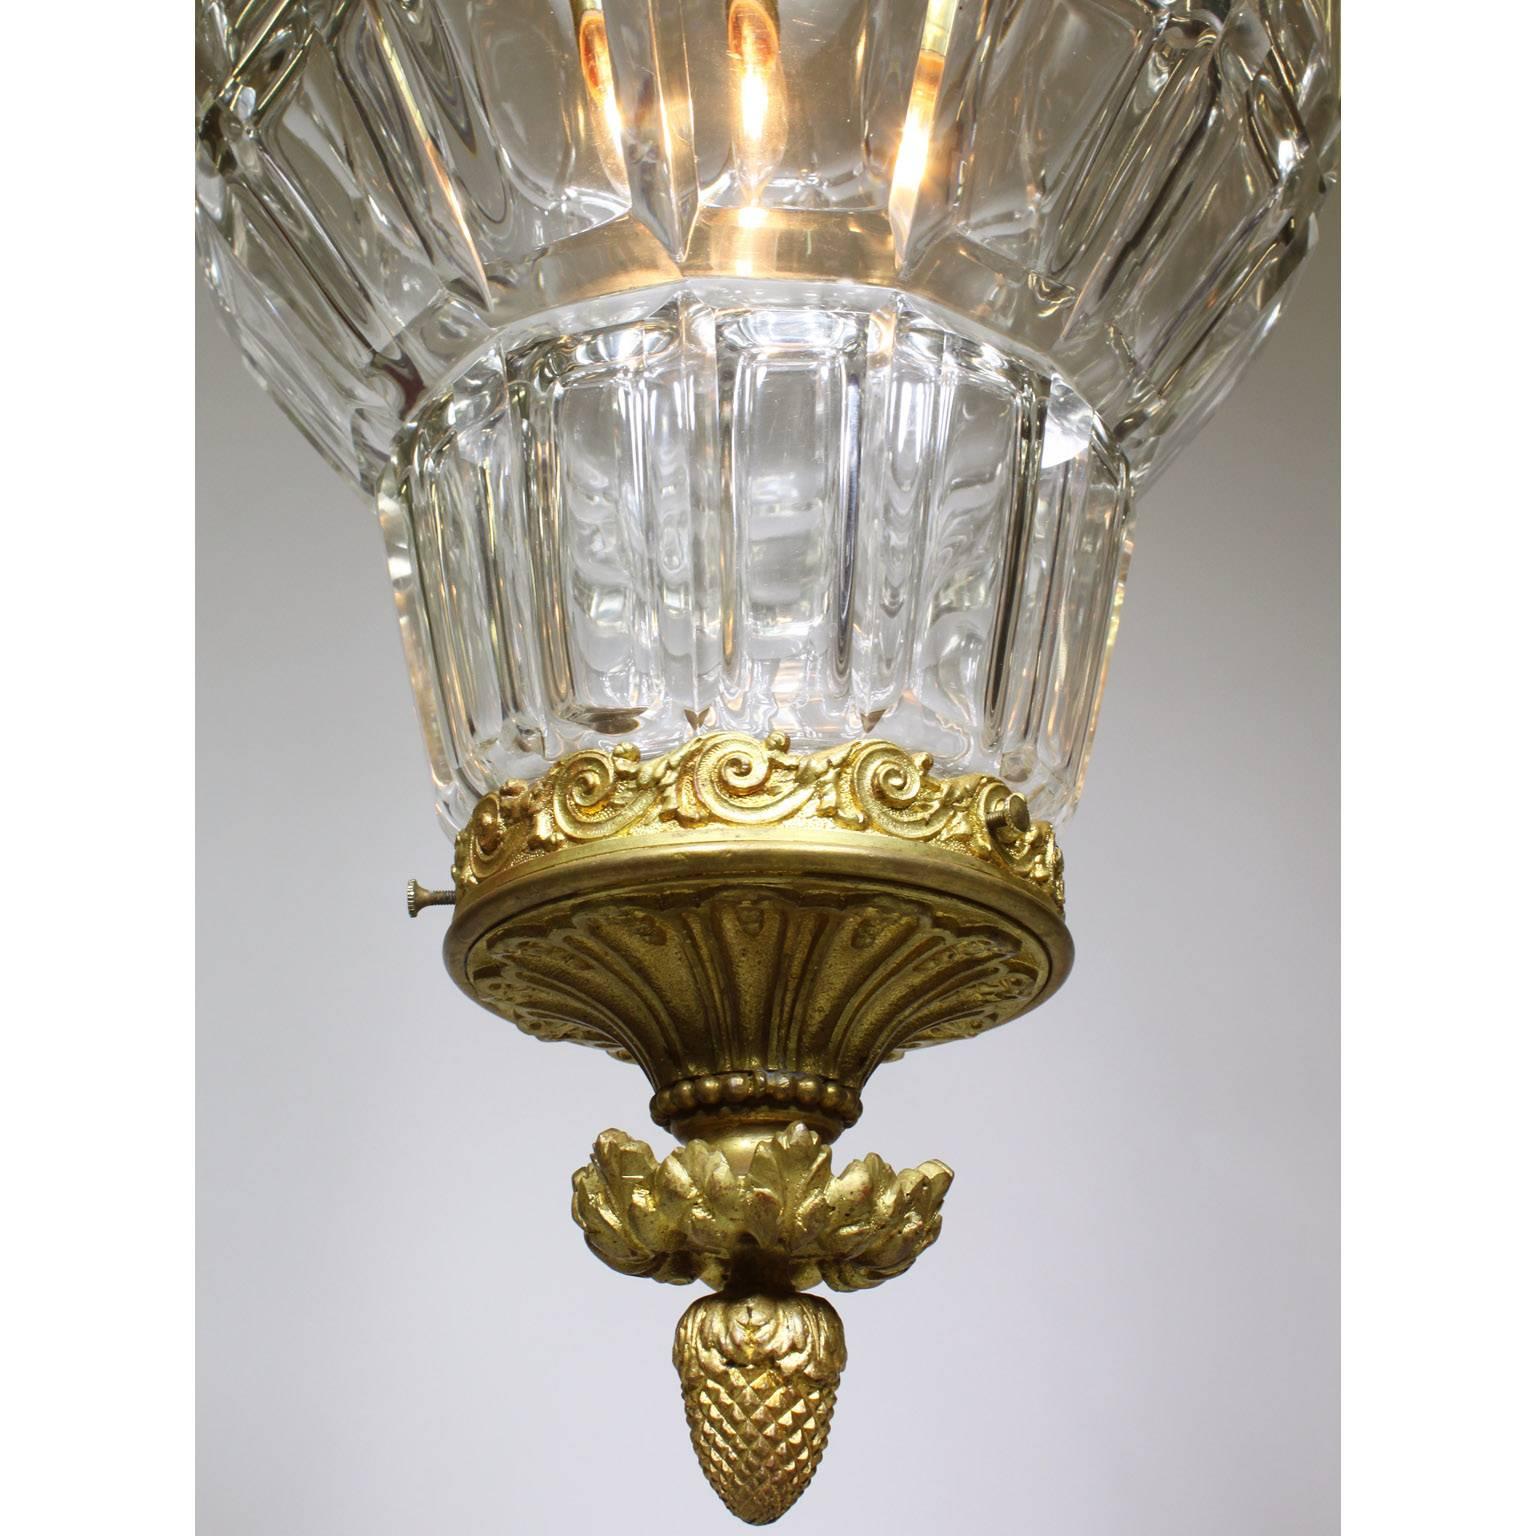 Early 20th Century French 19th-20th Century Gilt-Bronze and Cut-Glass 